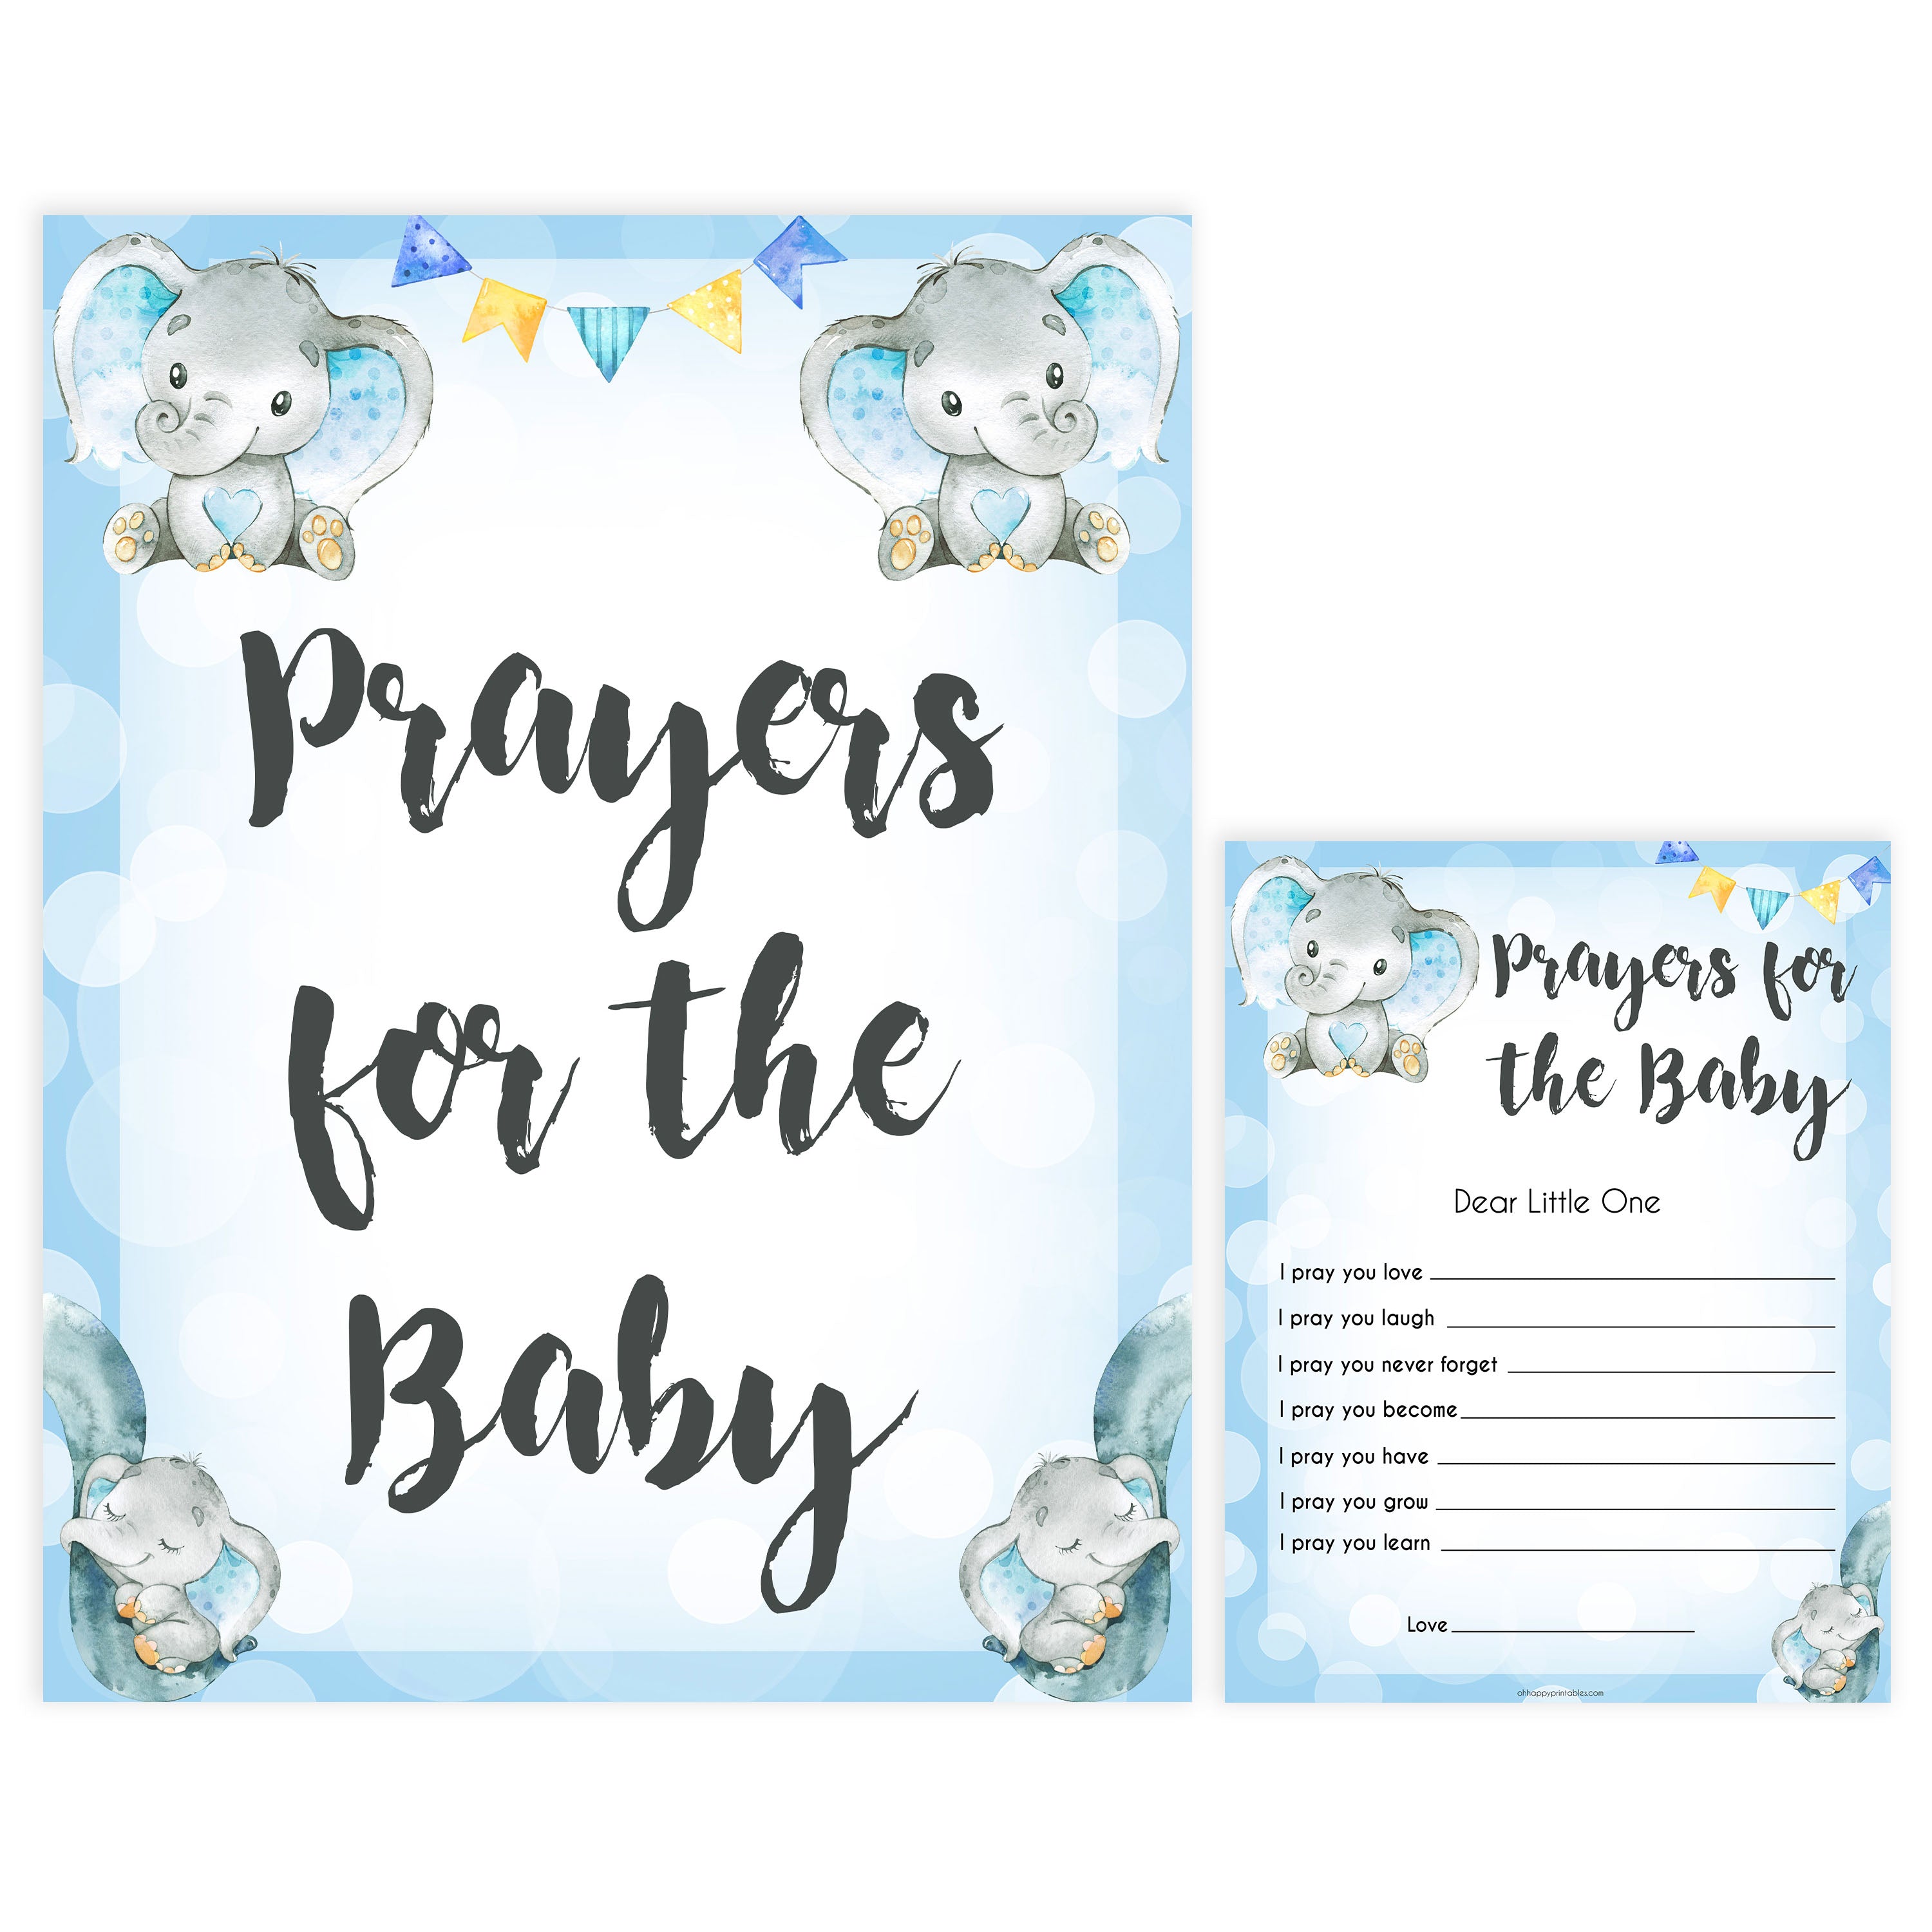 Blue elephant baby games, prayers for the baby, elephant baby games, printable baby games, top baby games, best baby shower games, baby shower ideas, fun baby games, elephant baby shower